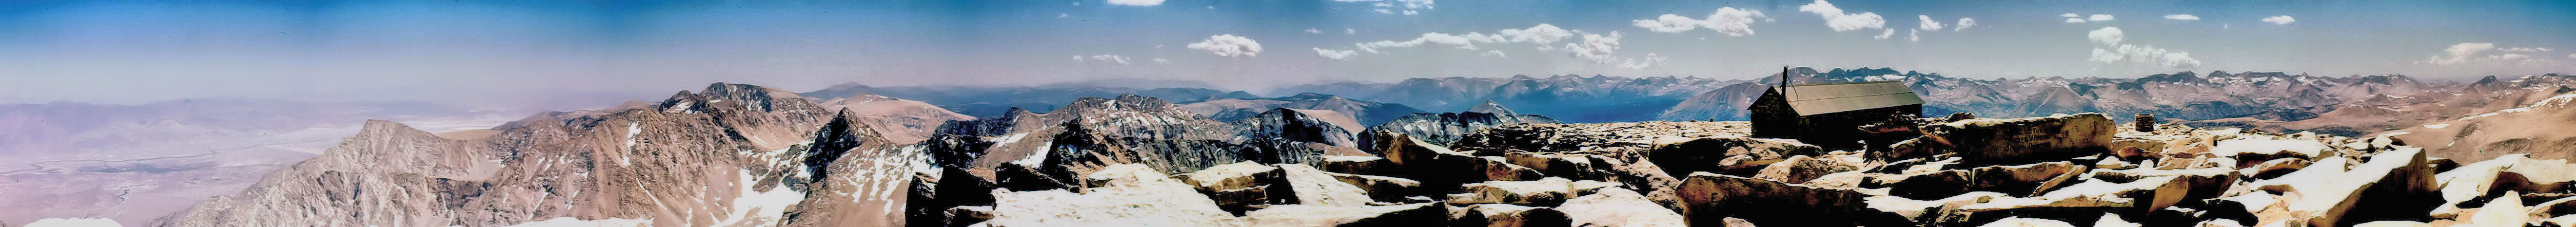 Panoramic view from top of Mount Whitney - 24 Jul 1957